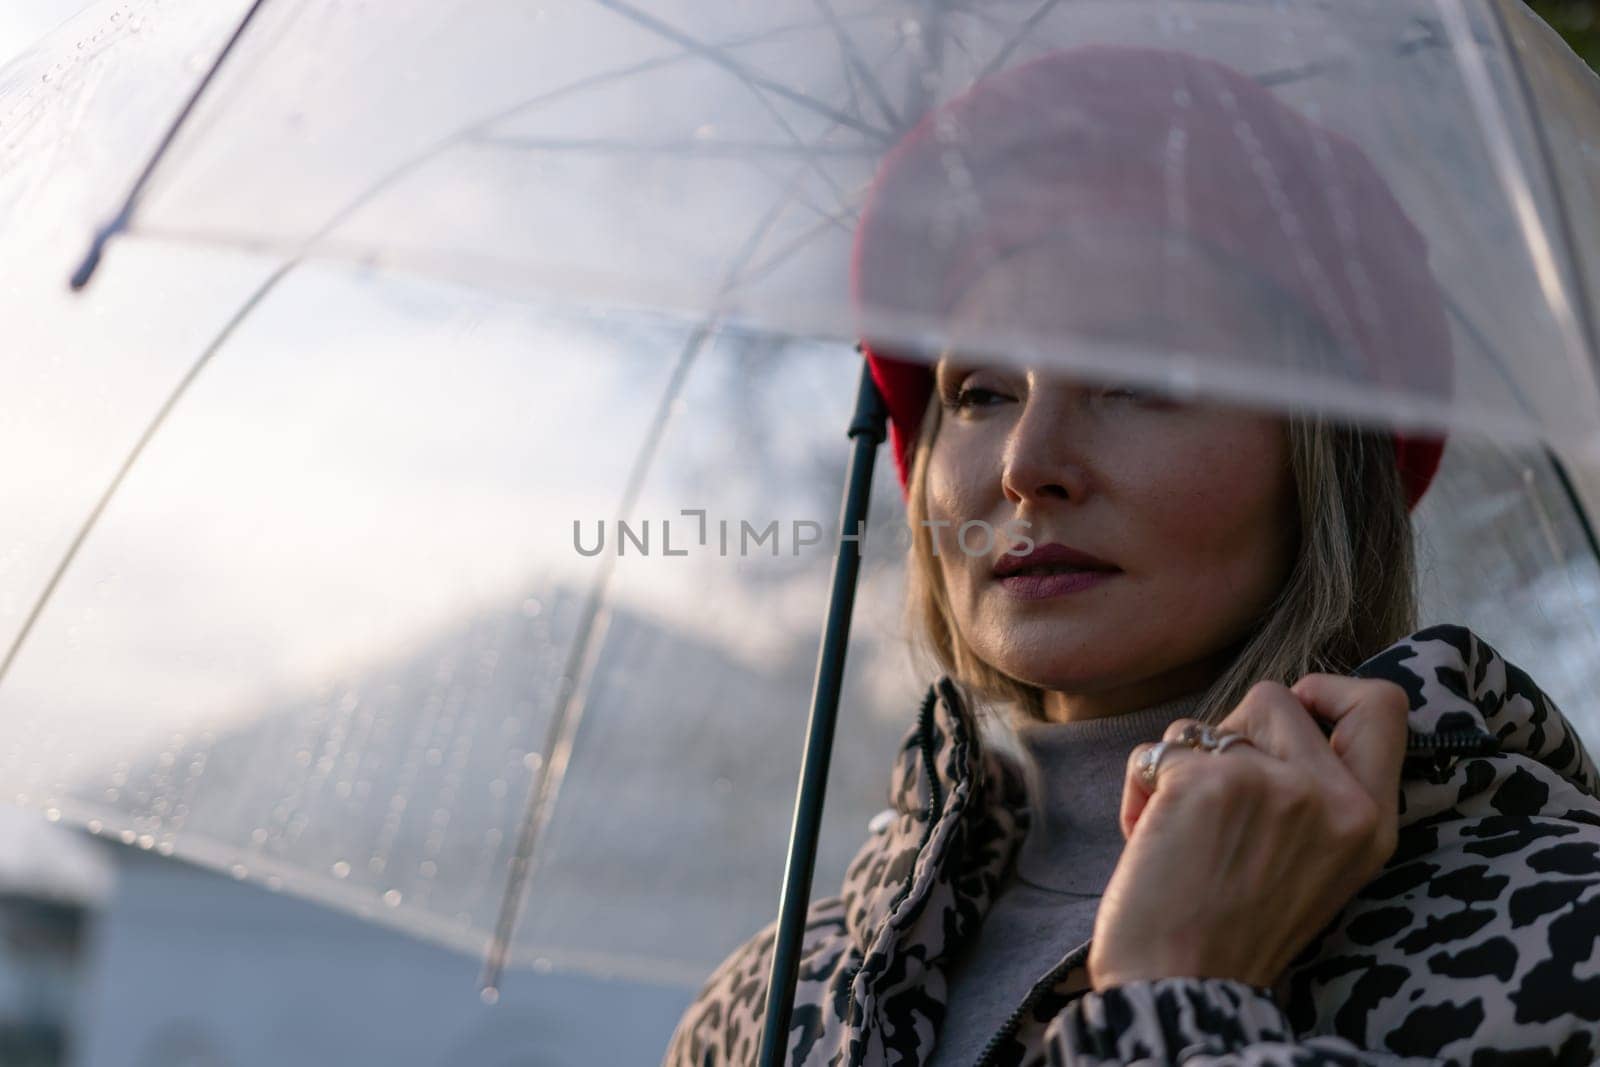 A woman wearing a red hat and a black and white jacket is holding a clear umbrella. The umbrella is open, and the woman is looking up at the sky. Concept of solitude and contemplation